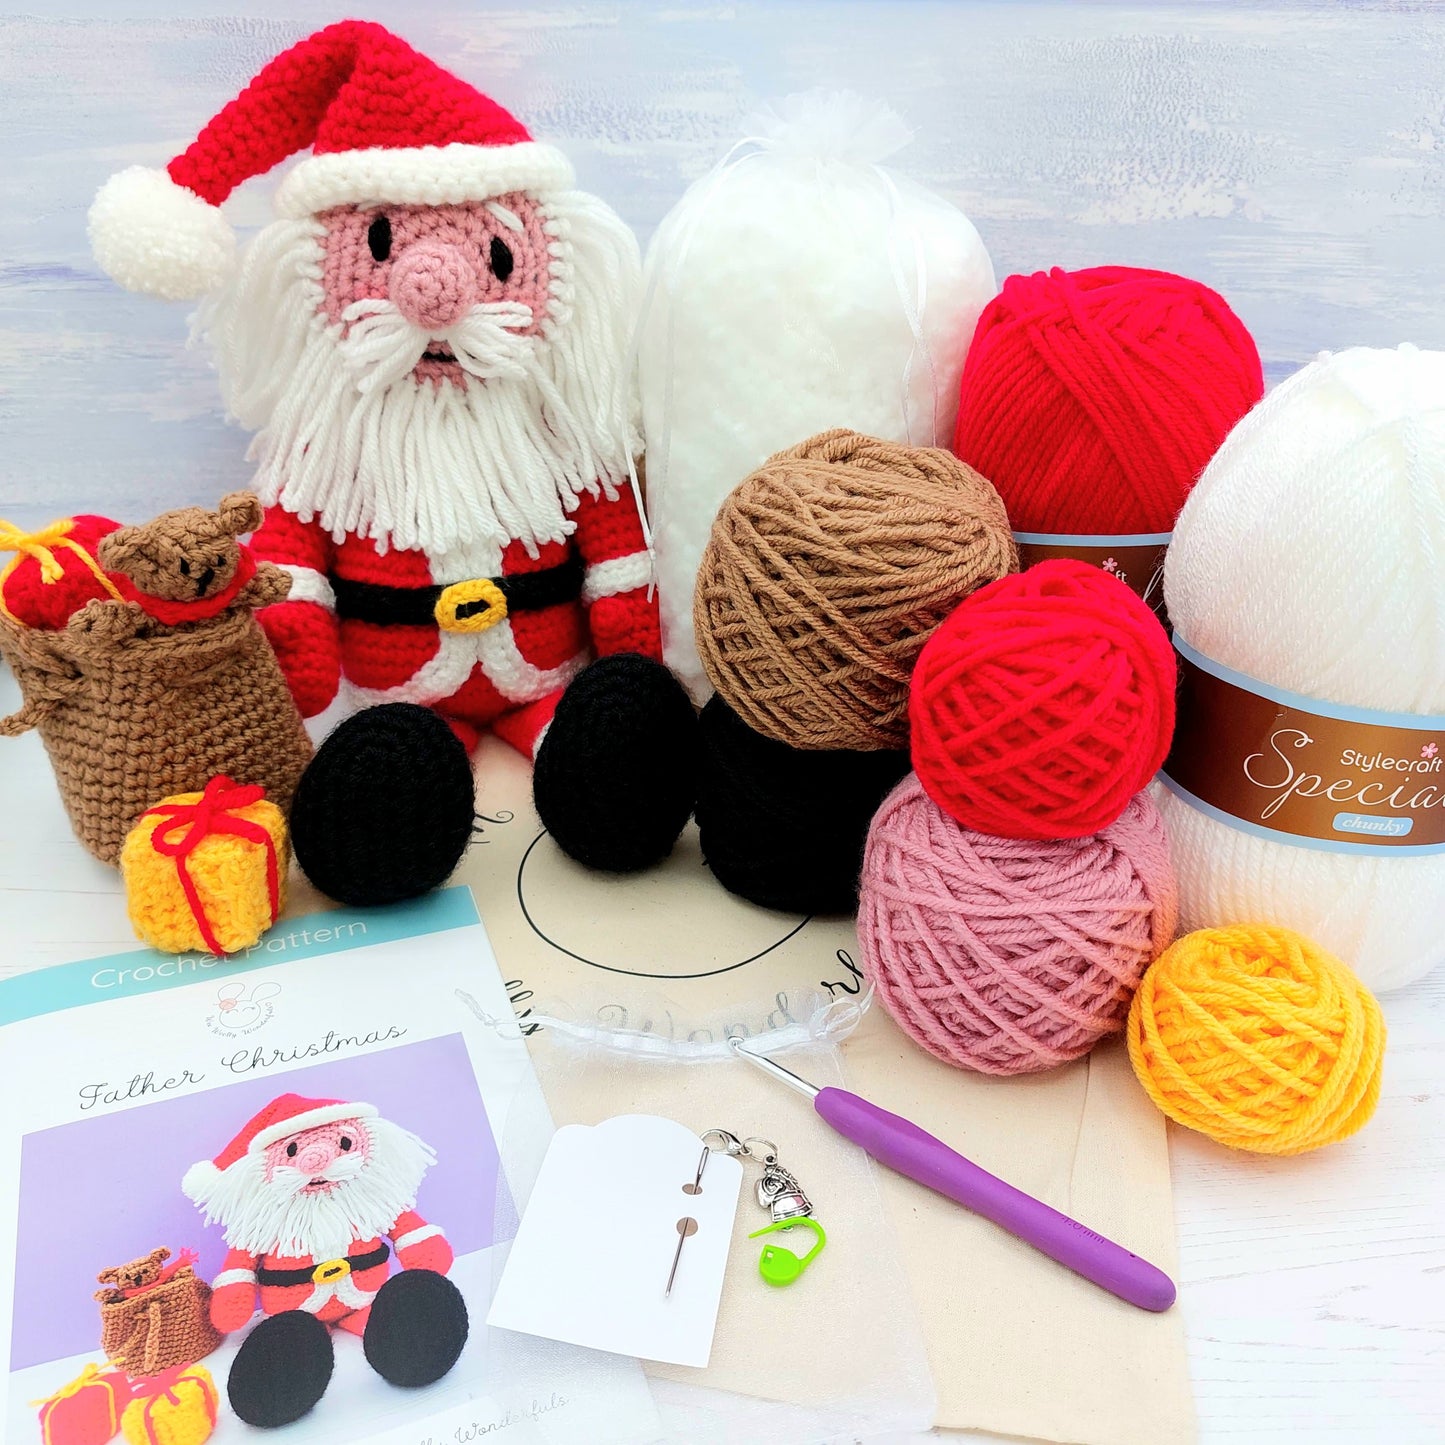 Full contents of Christmas crochet kit - wall, patterns, and crochet hook